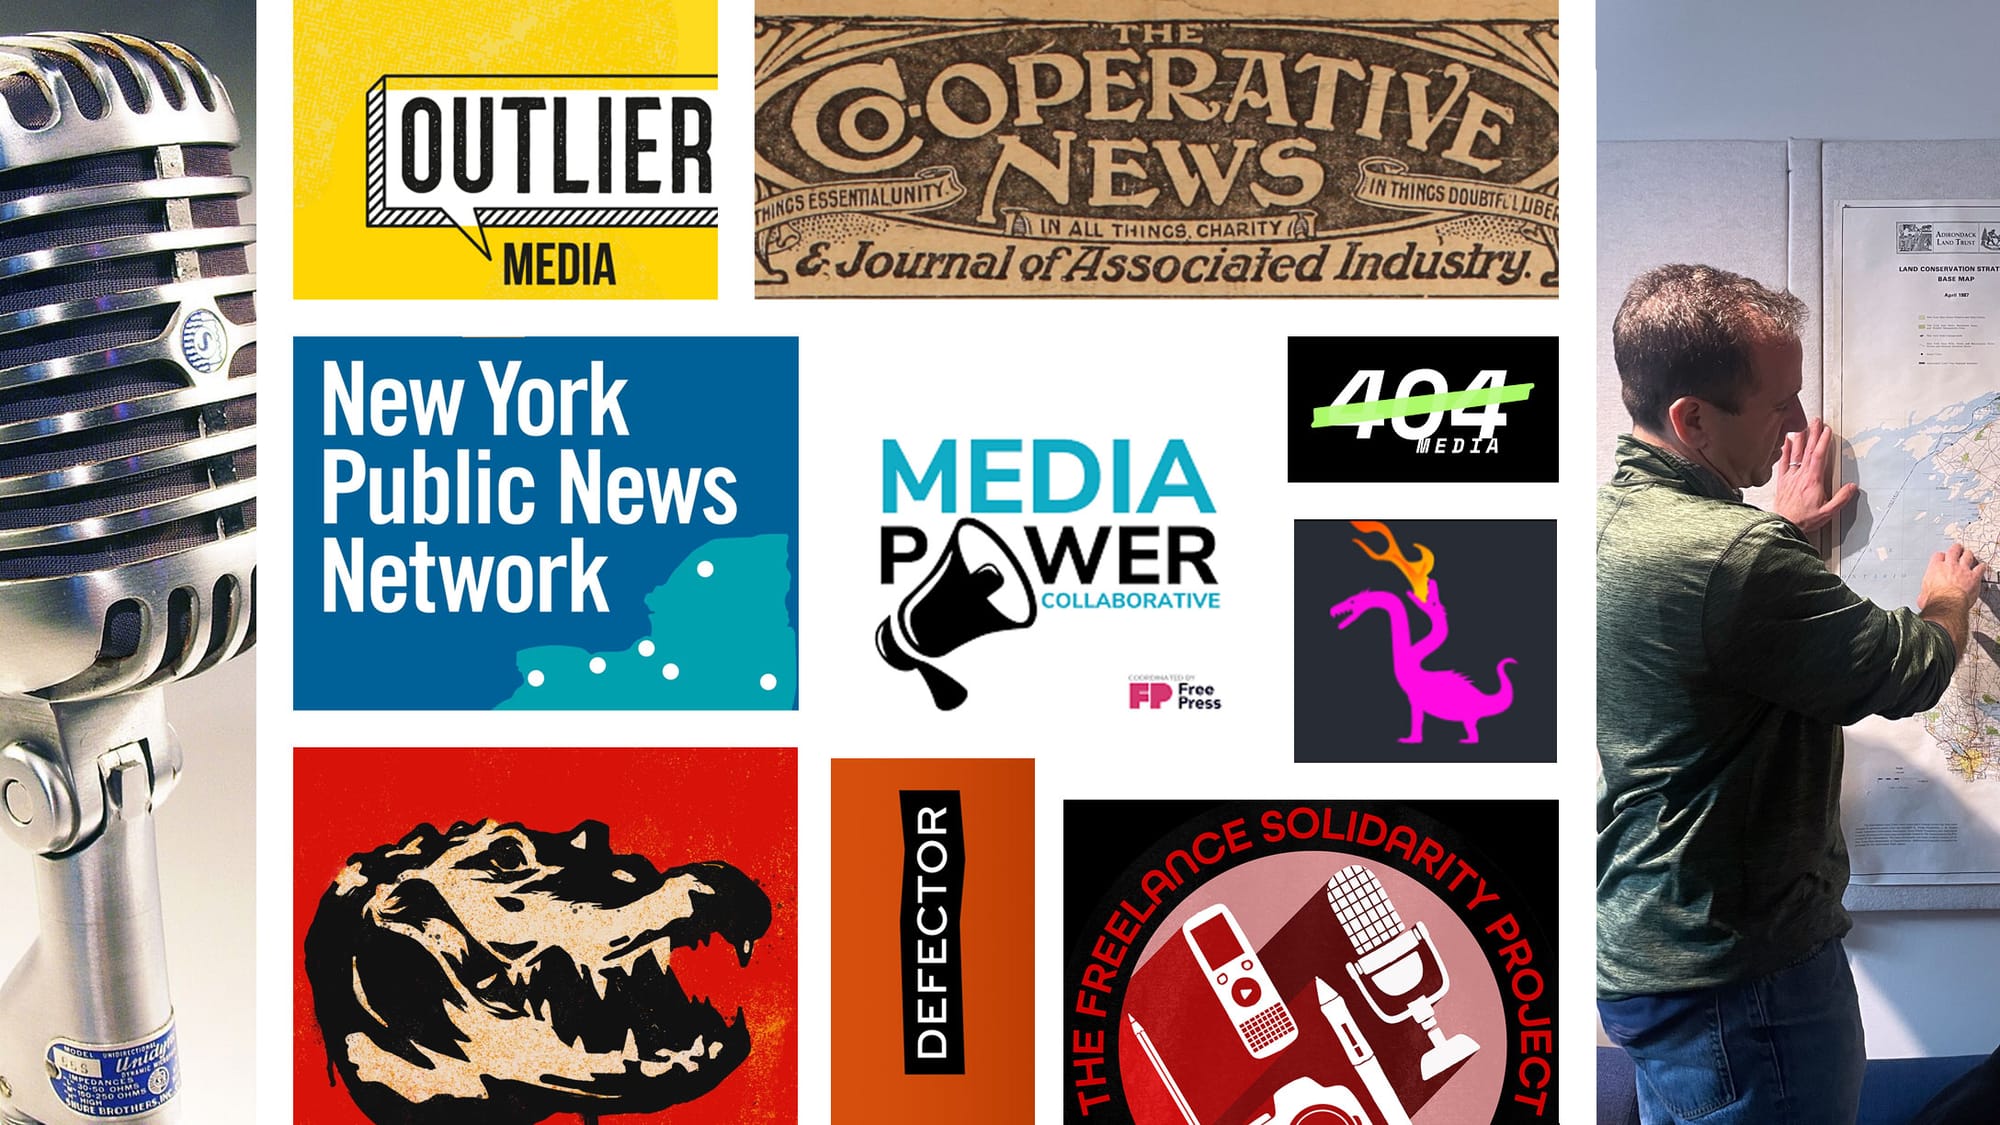 A bright collage of images for and about alternative and cooperative media, including Media Power Collaborative, Outlier Media, New York Public News Network, 404 Media, Defector, the Flaming Hydra, Freelance Solidarity Project, and How Things Work